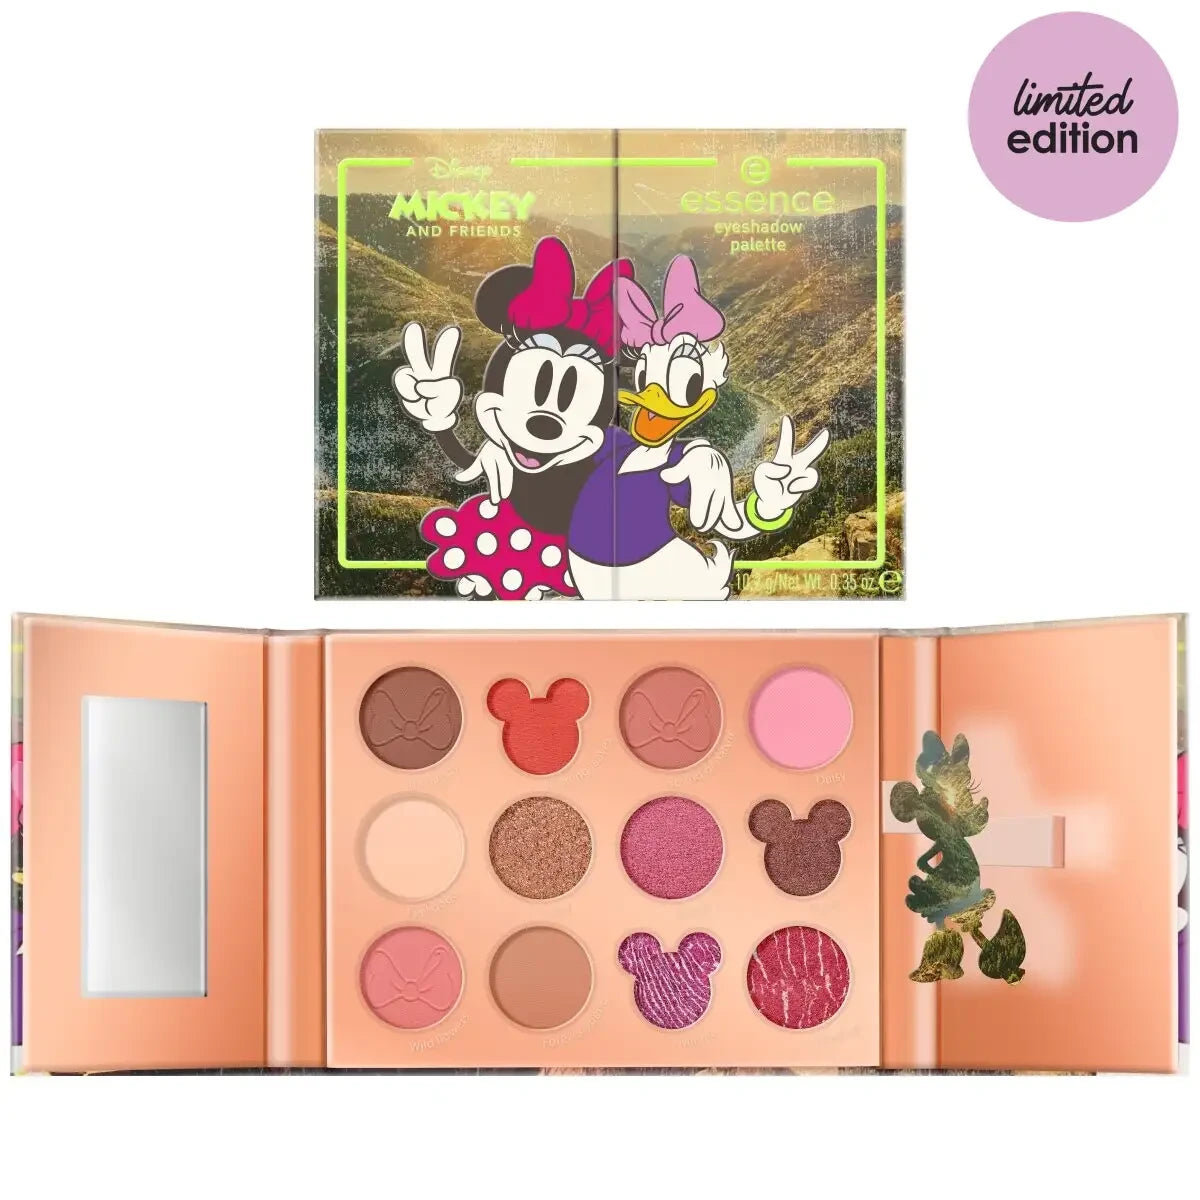 House Disney No Eyeshadow Has Palette and essence Age Imagination – 02 Cosmetics | Friends Mickey of